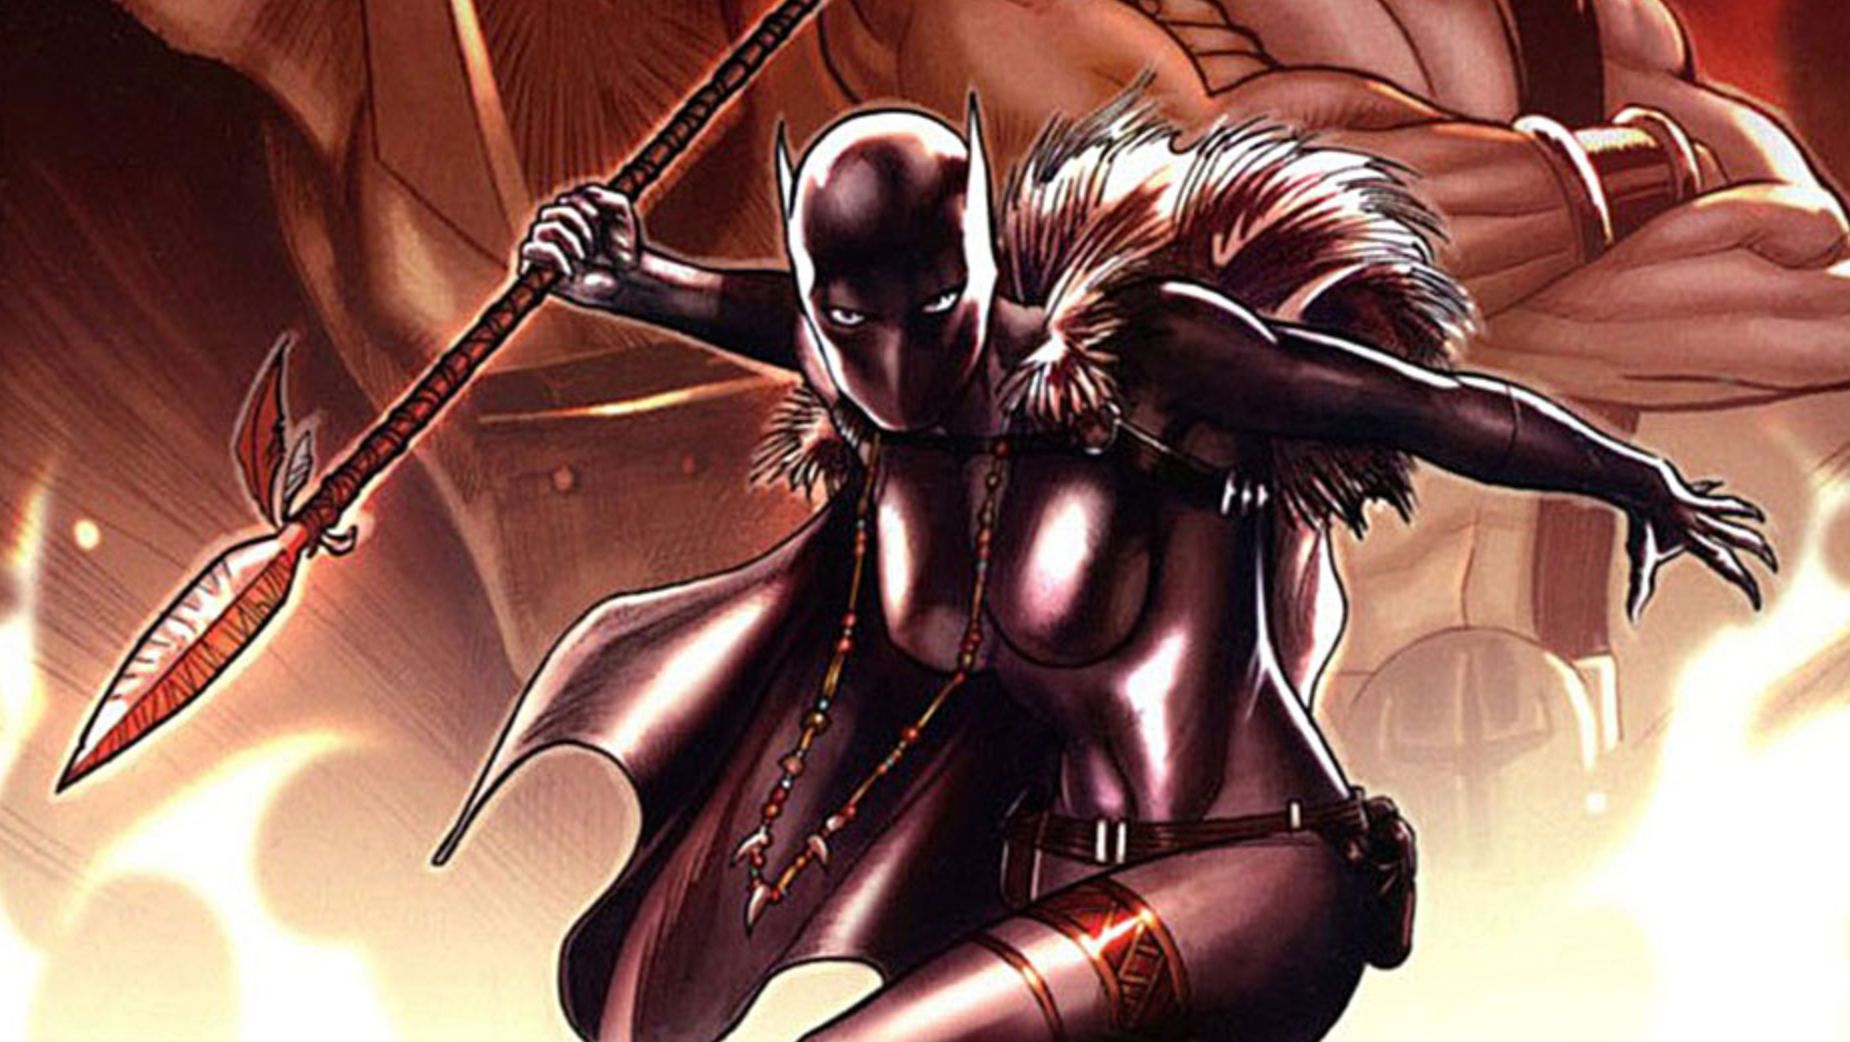 Black Panther’s Sister Shuri is Getting Sidelined in Marvel Comics, Too